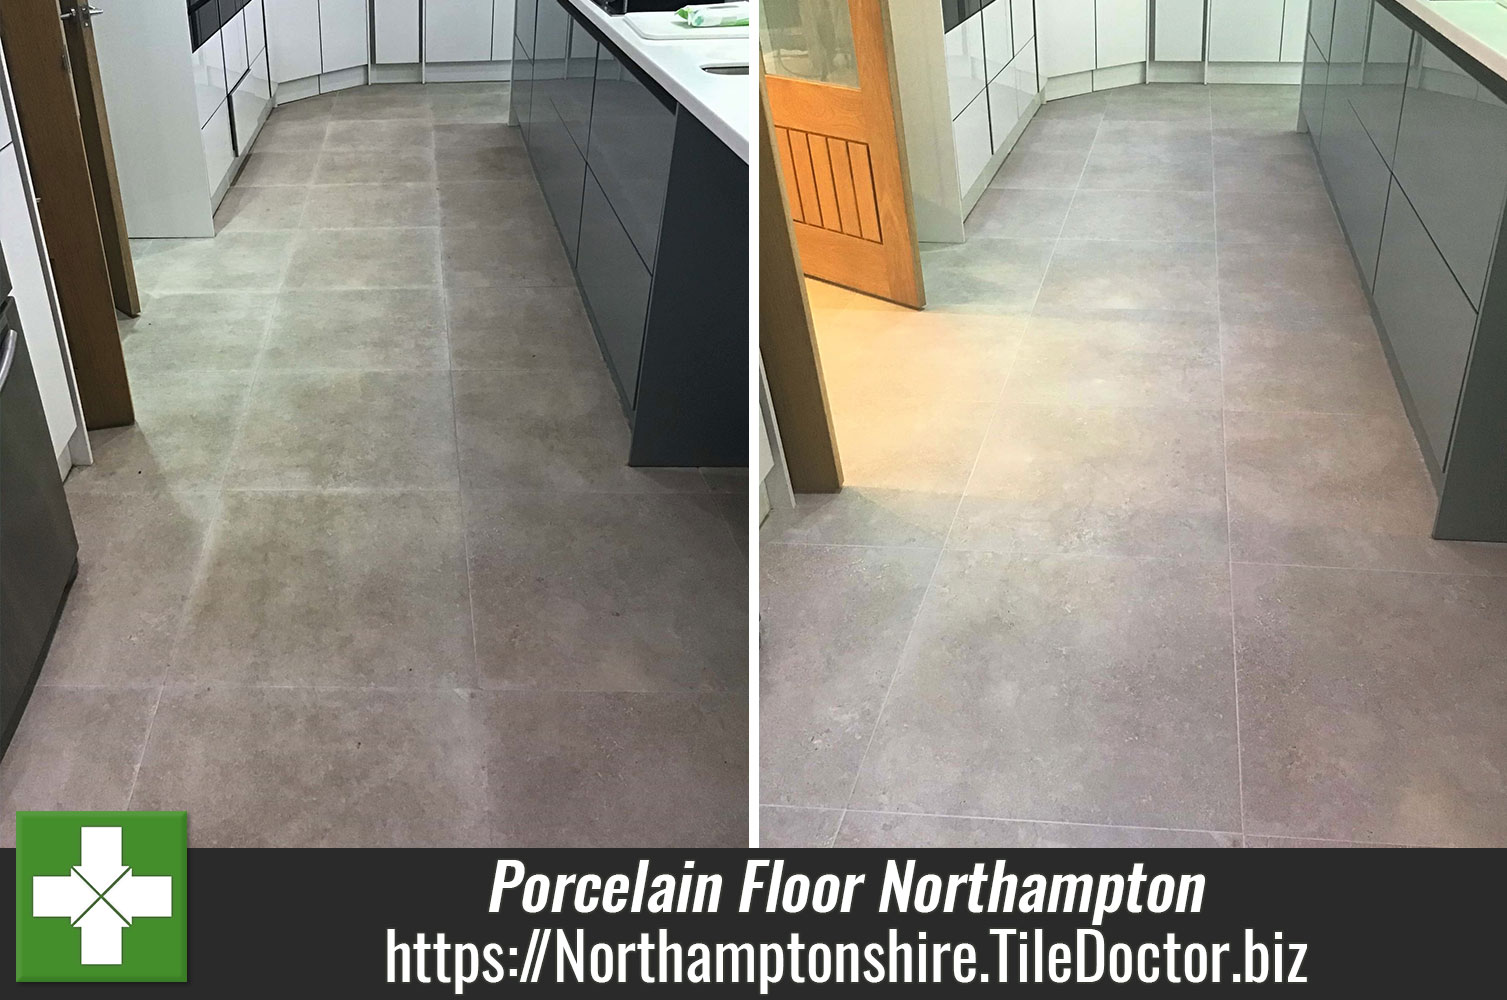 Removing Grout Smears from Porcelain Tiles with Tile Doctor Grout Clean-up in Northampton